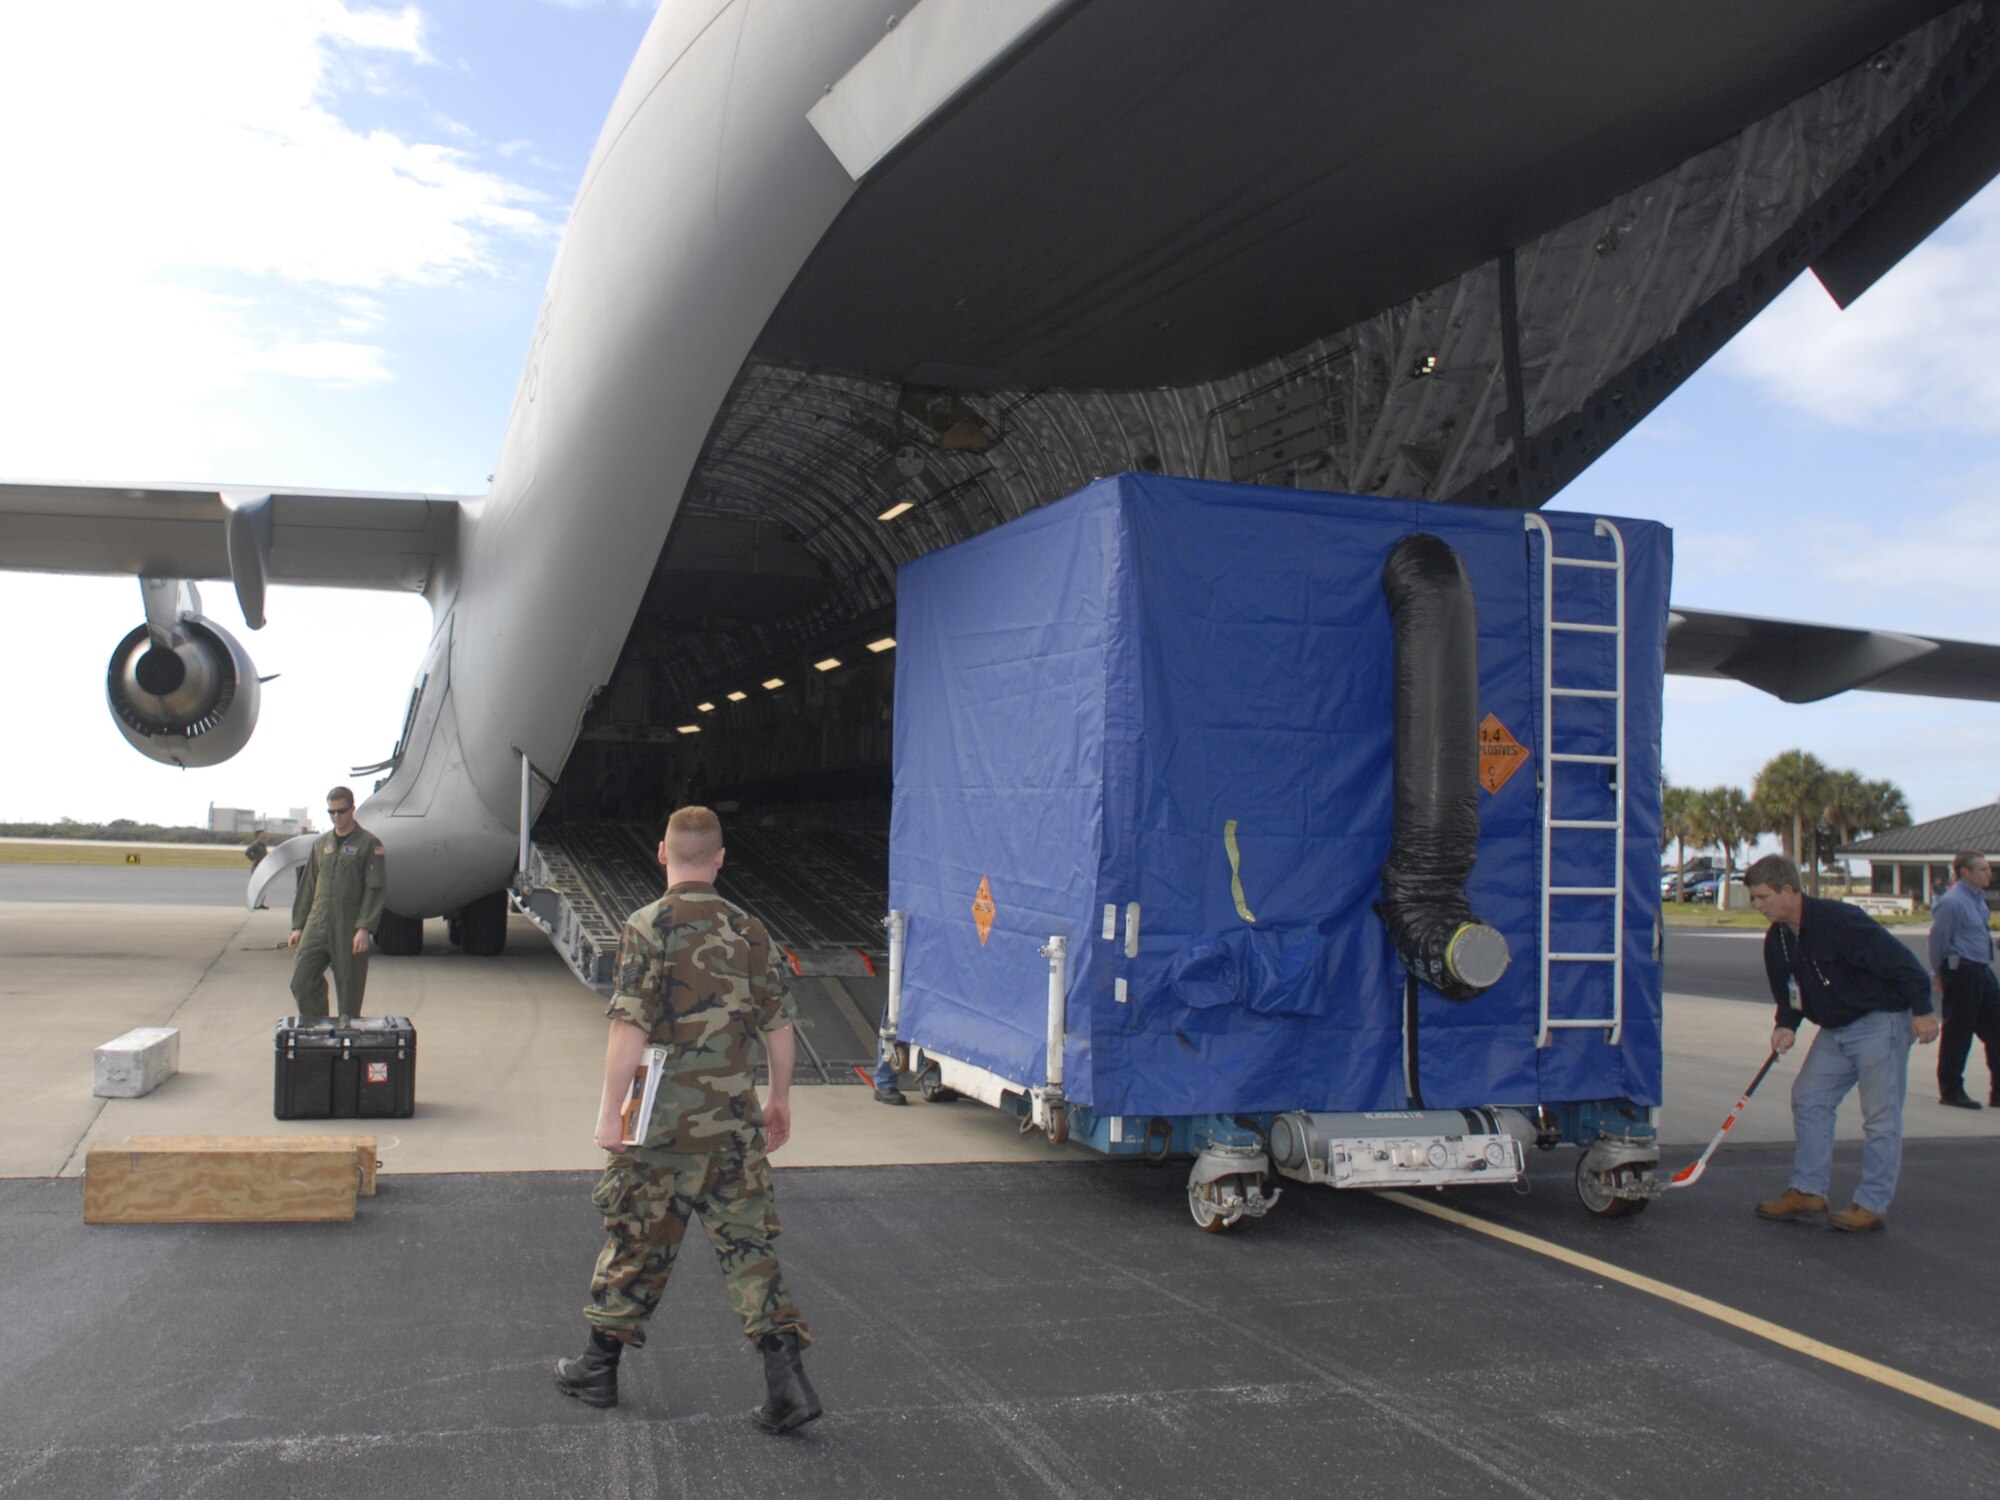 Air Force and contractor personnel observe as GPS satellite IIR-M 20, safely housed in its shipping container, is offloaded Jan. 10 at Cape Canaveral AFS. (U.S. Air Force photo by Tony Gray)